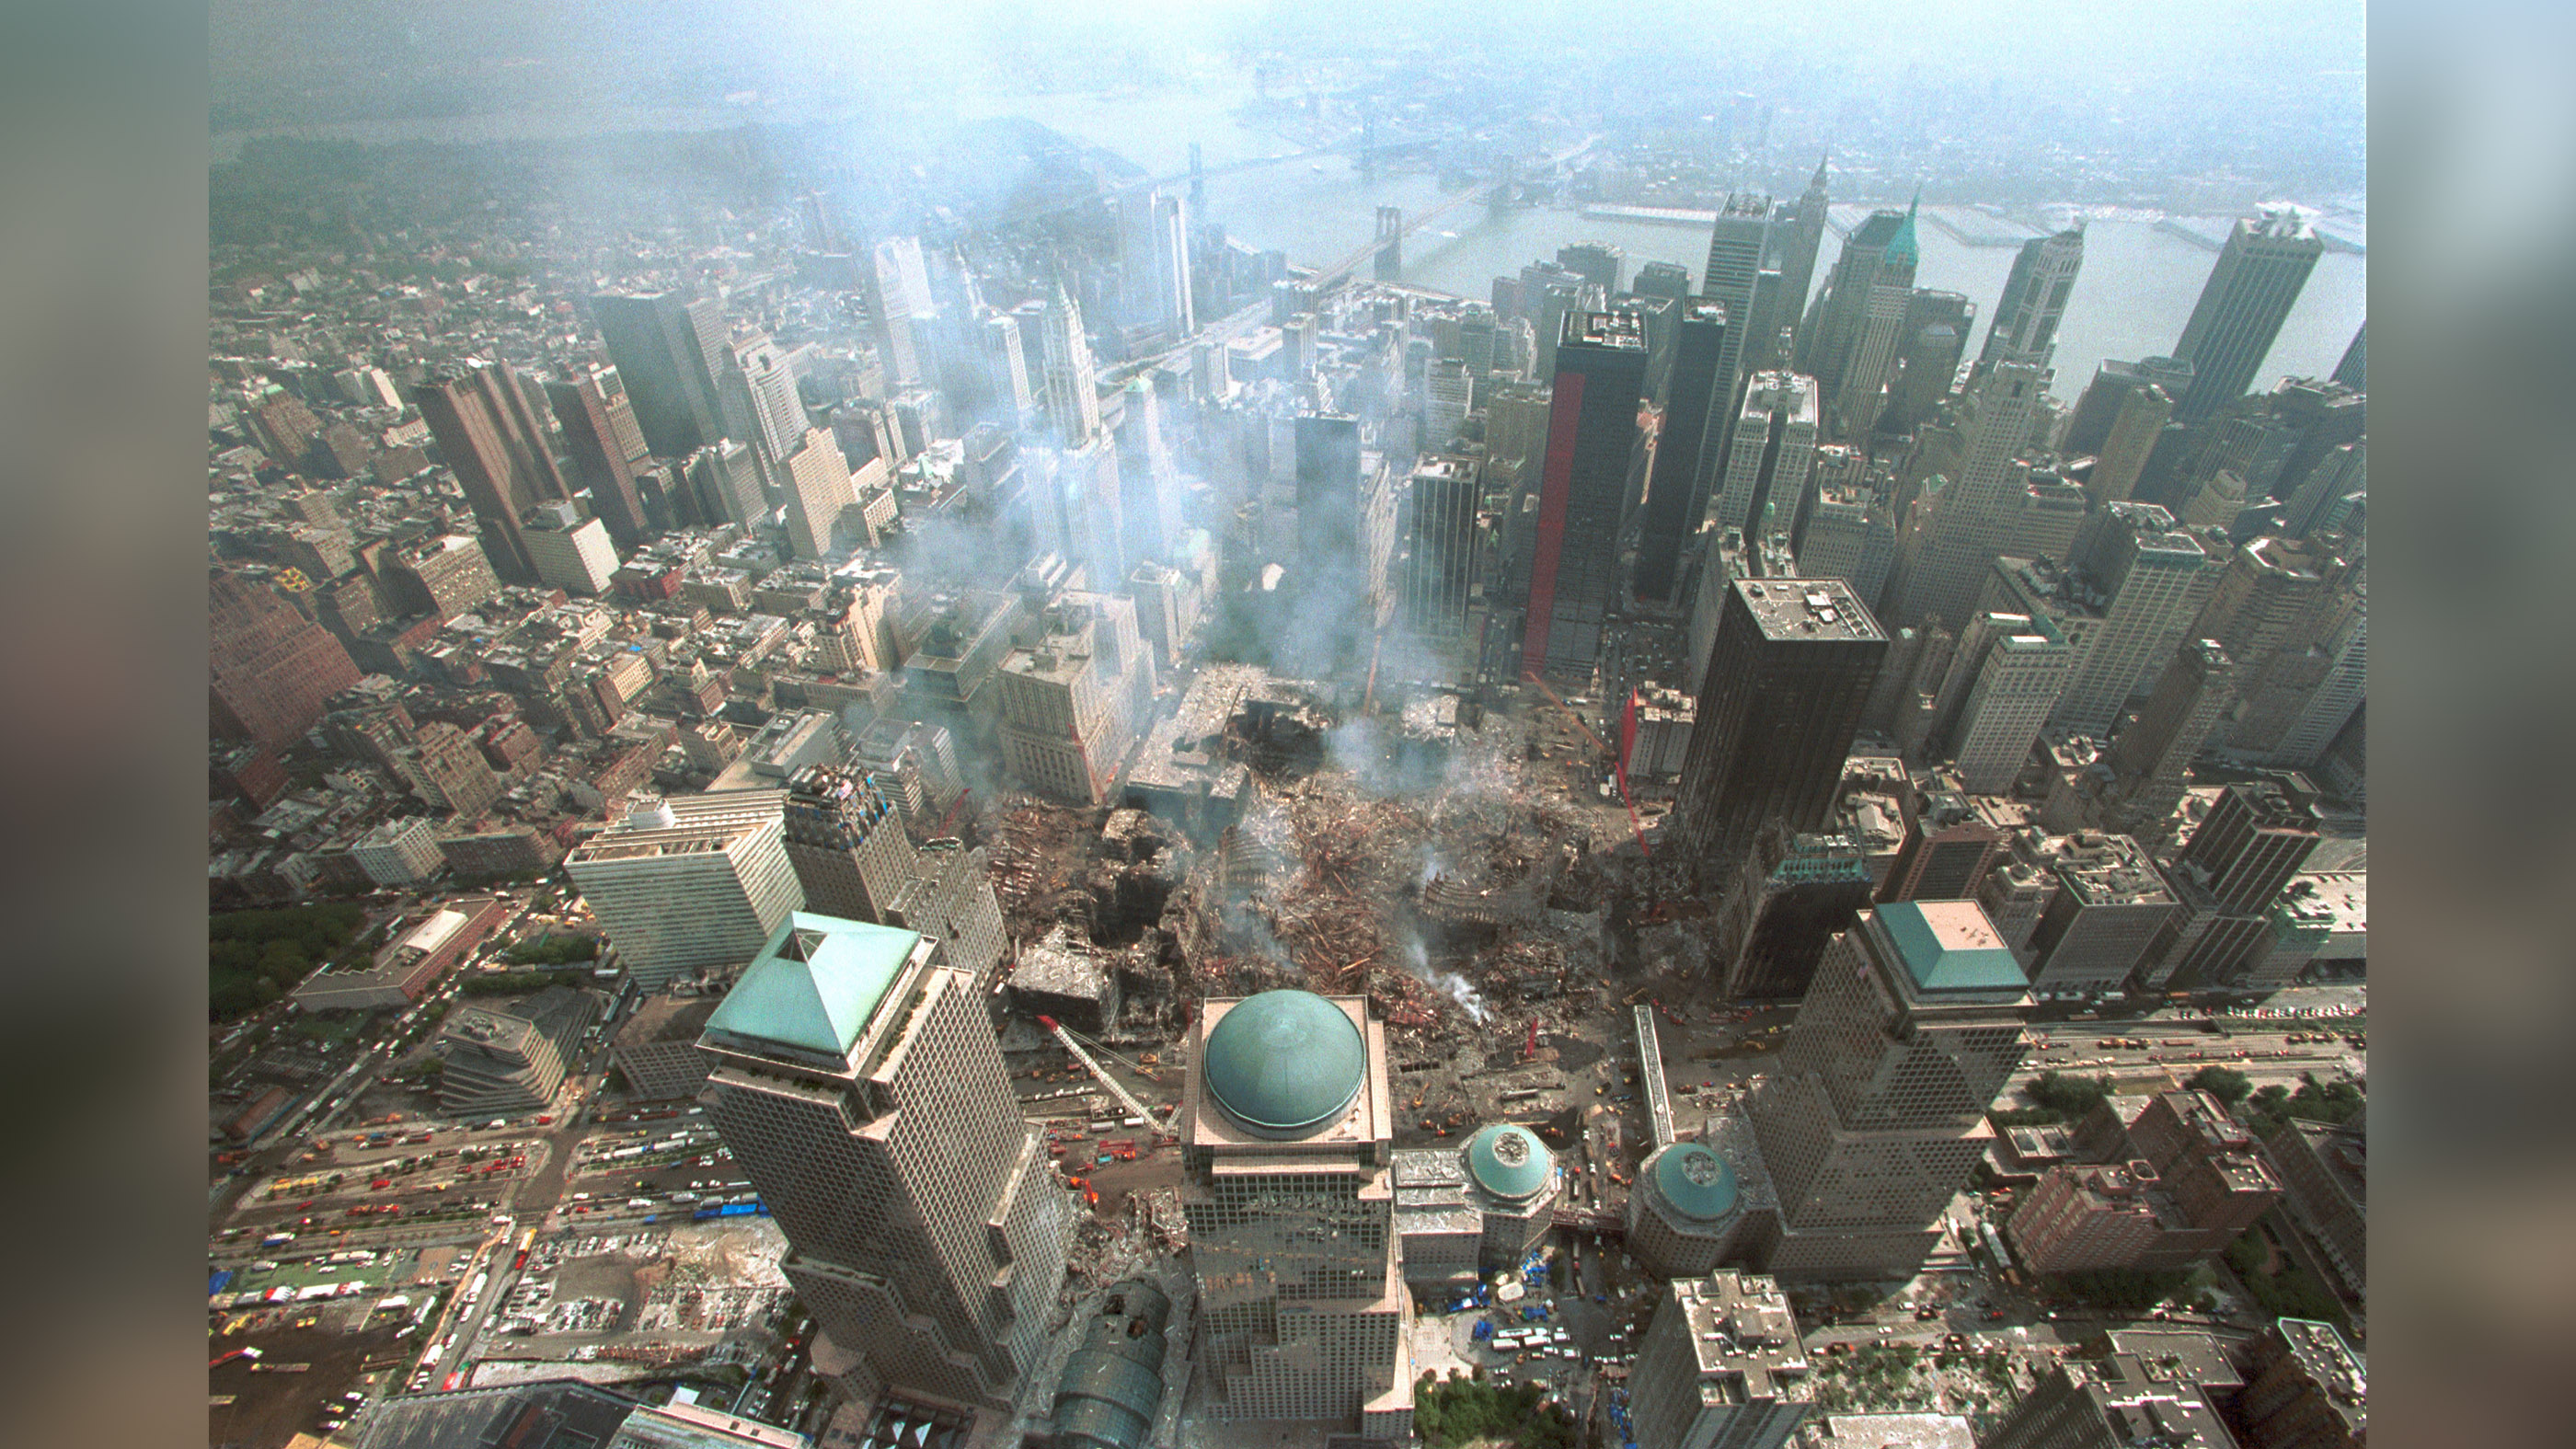 An aerial view of the NYC Custom house and surrounding area after the 9/11 terrorist attacks.